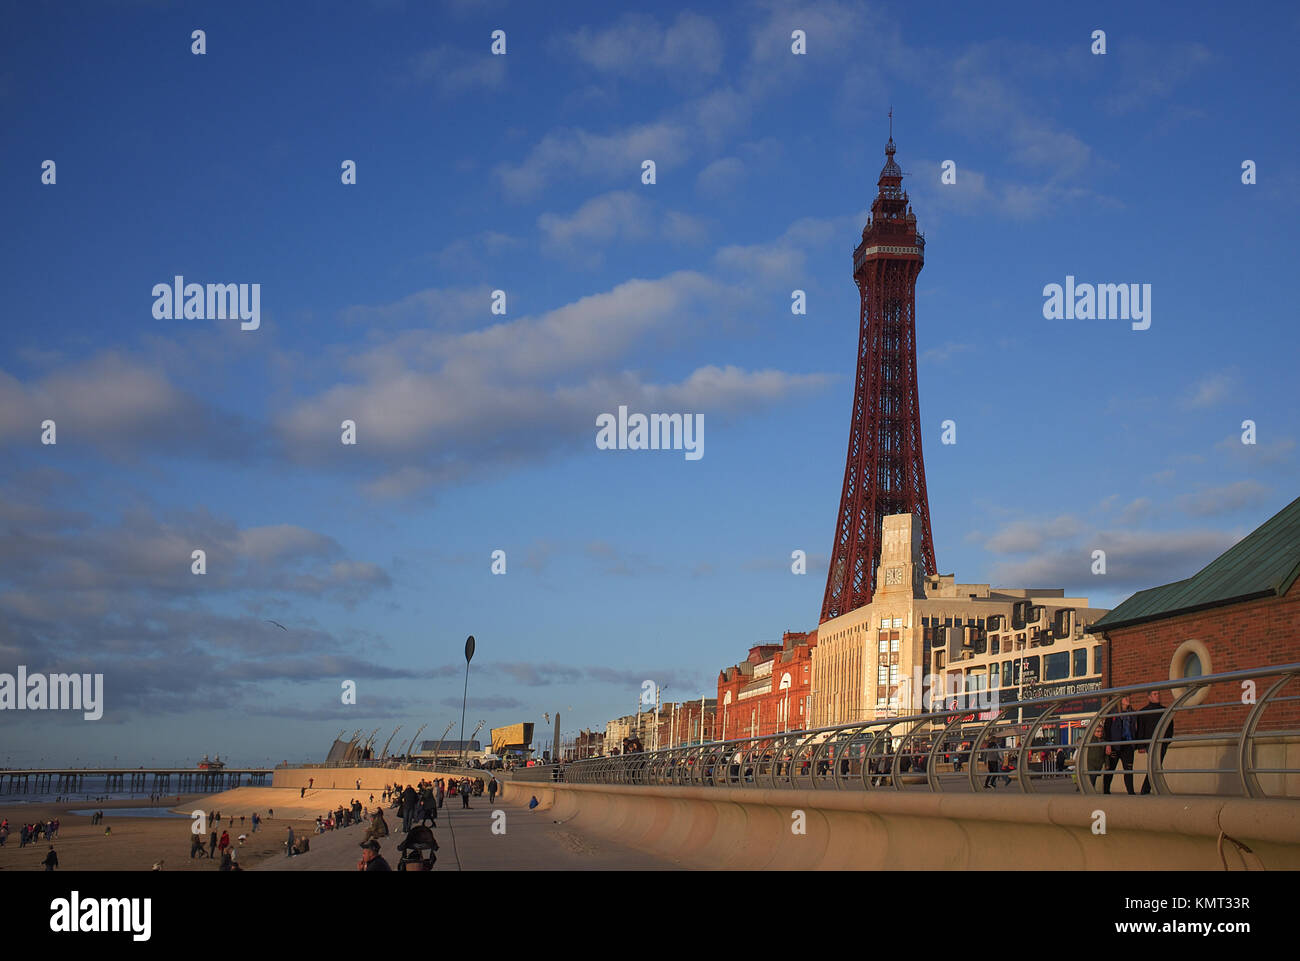 Blackpool Tower and promenade in evening light Stock Photo